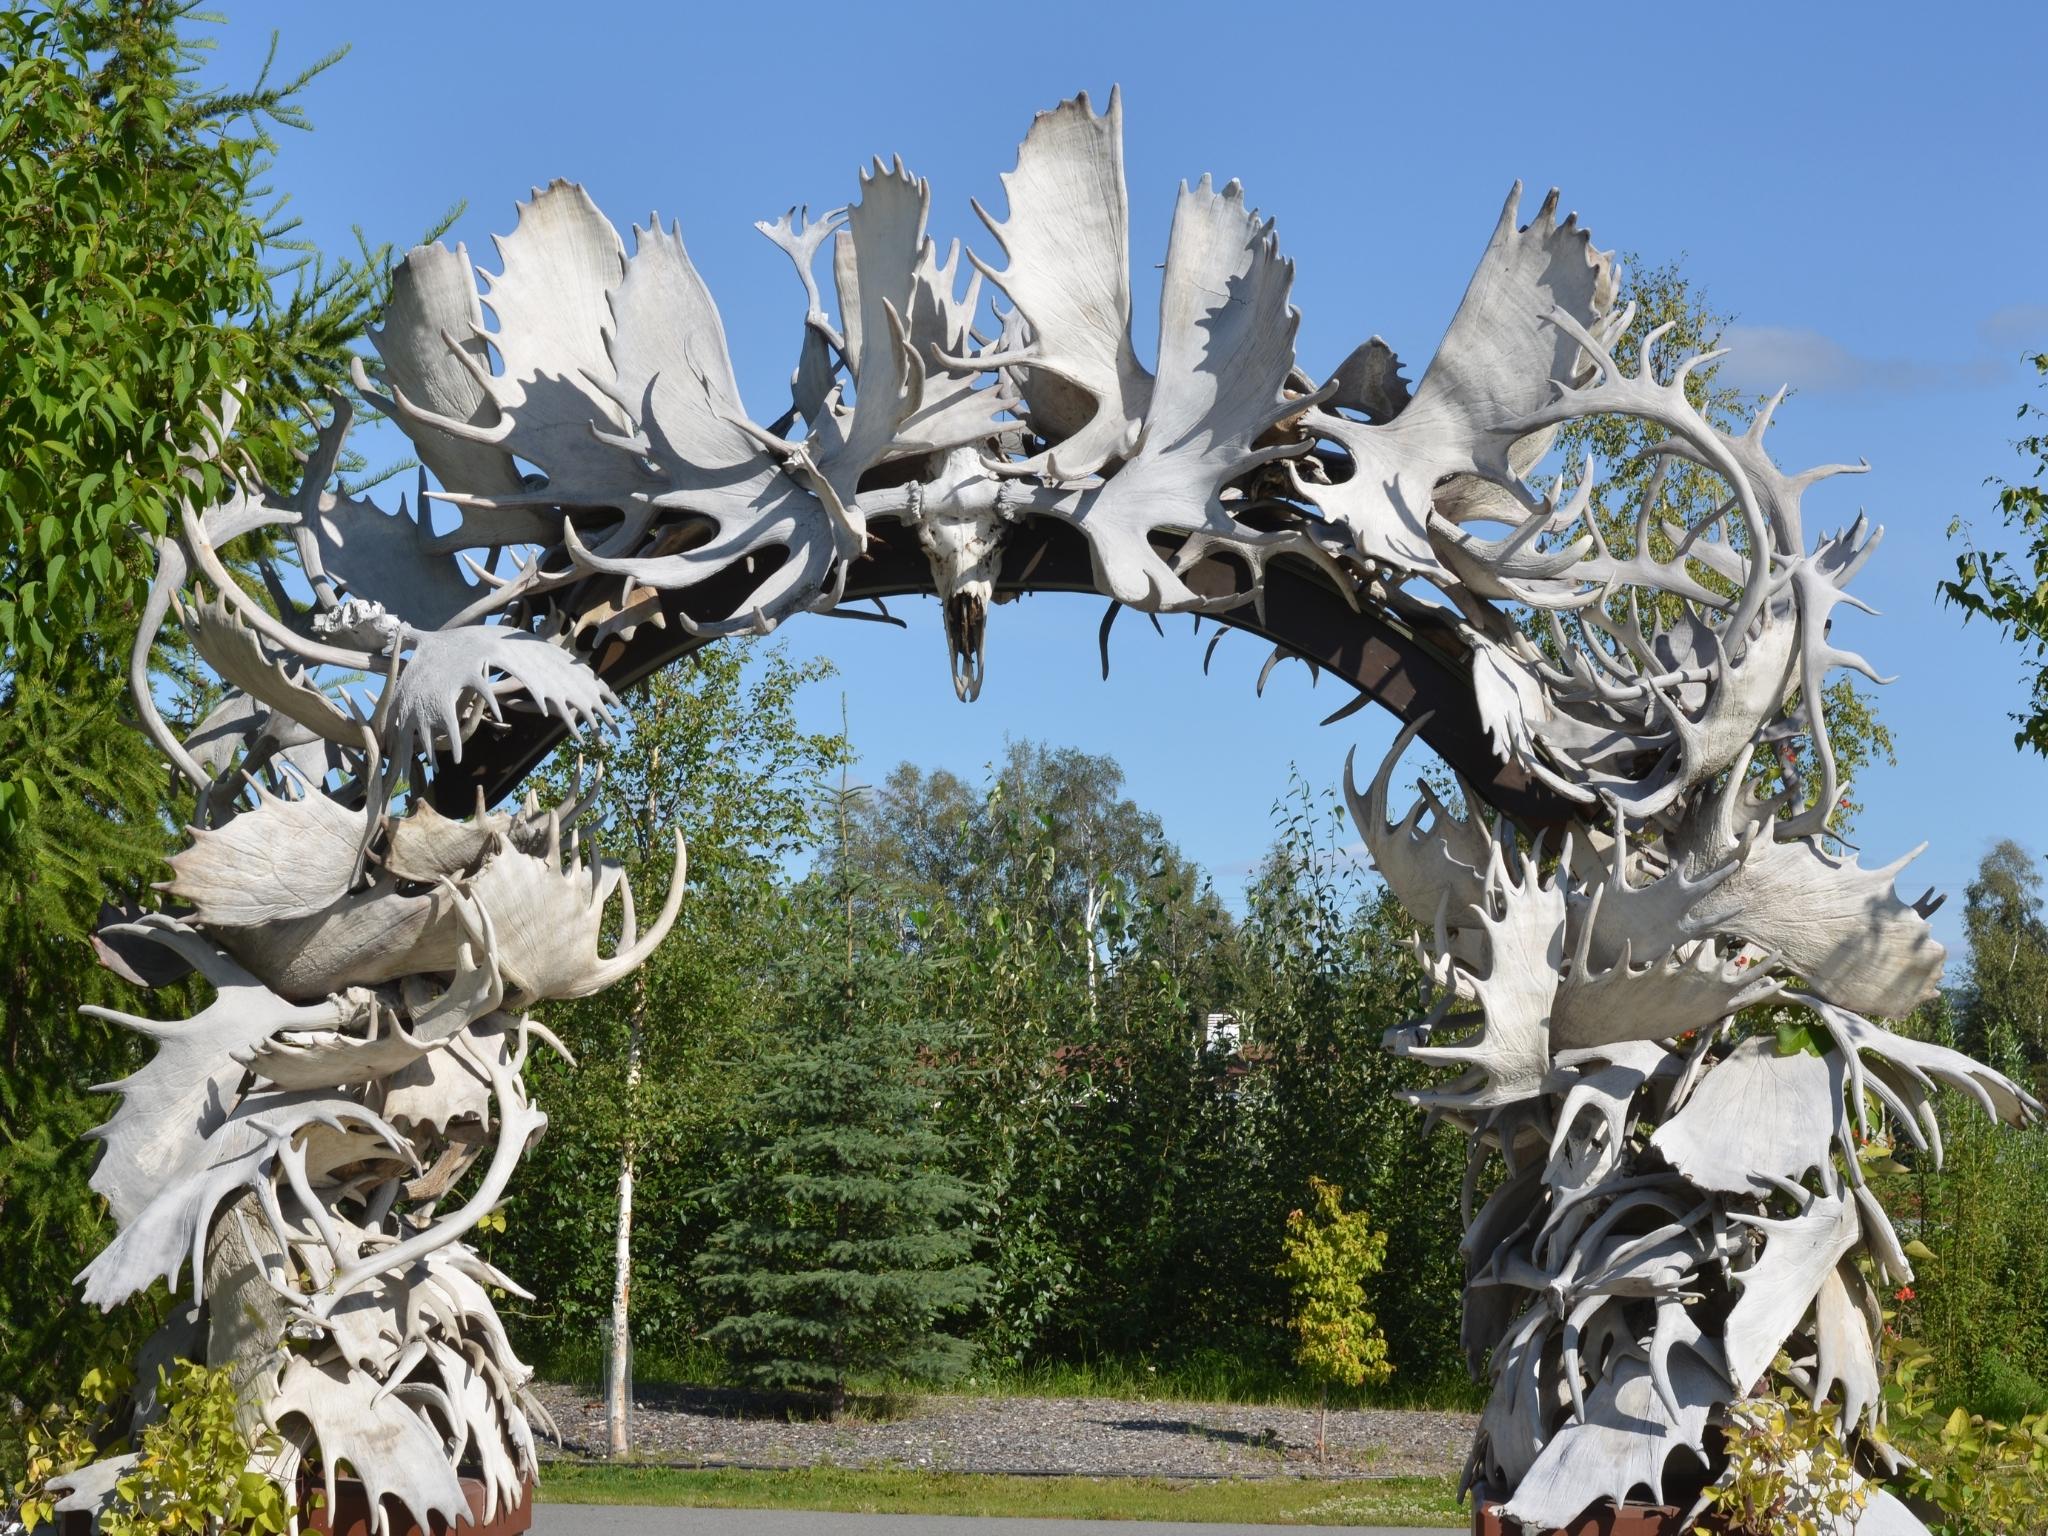 Visitor center entrance made of Moose and Caribou antlers in Fairbanks, Alaska